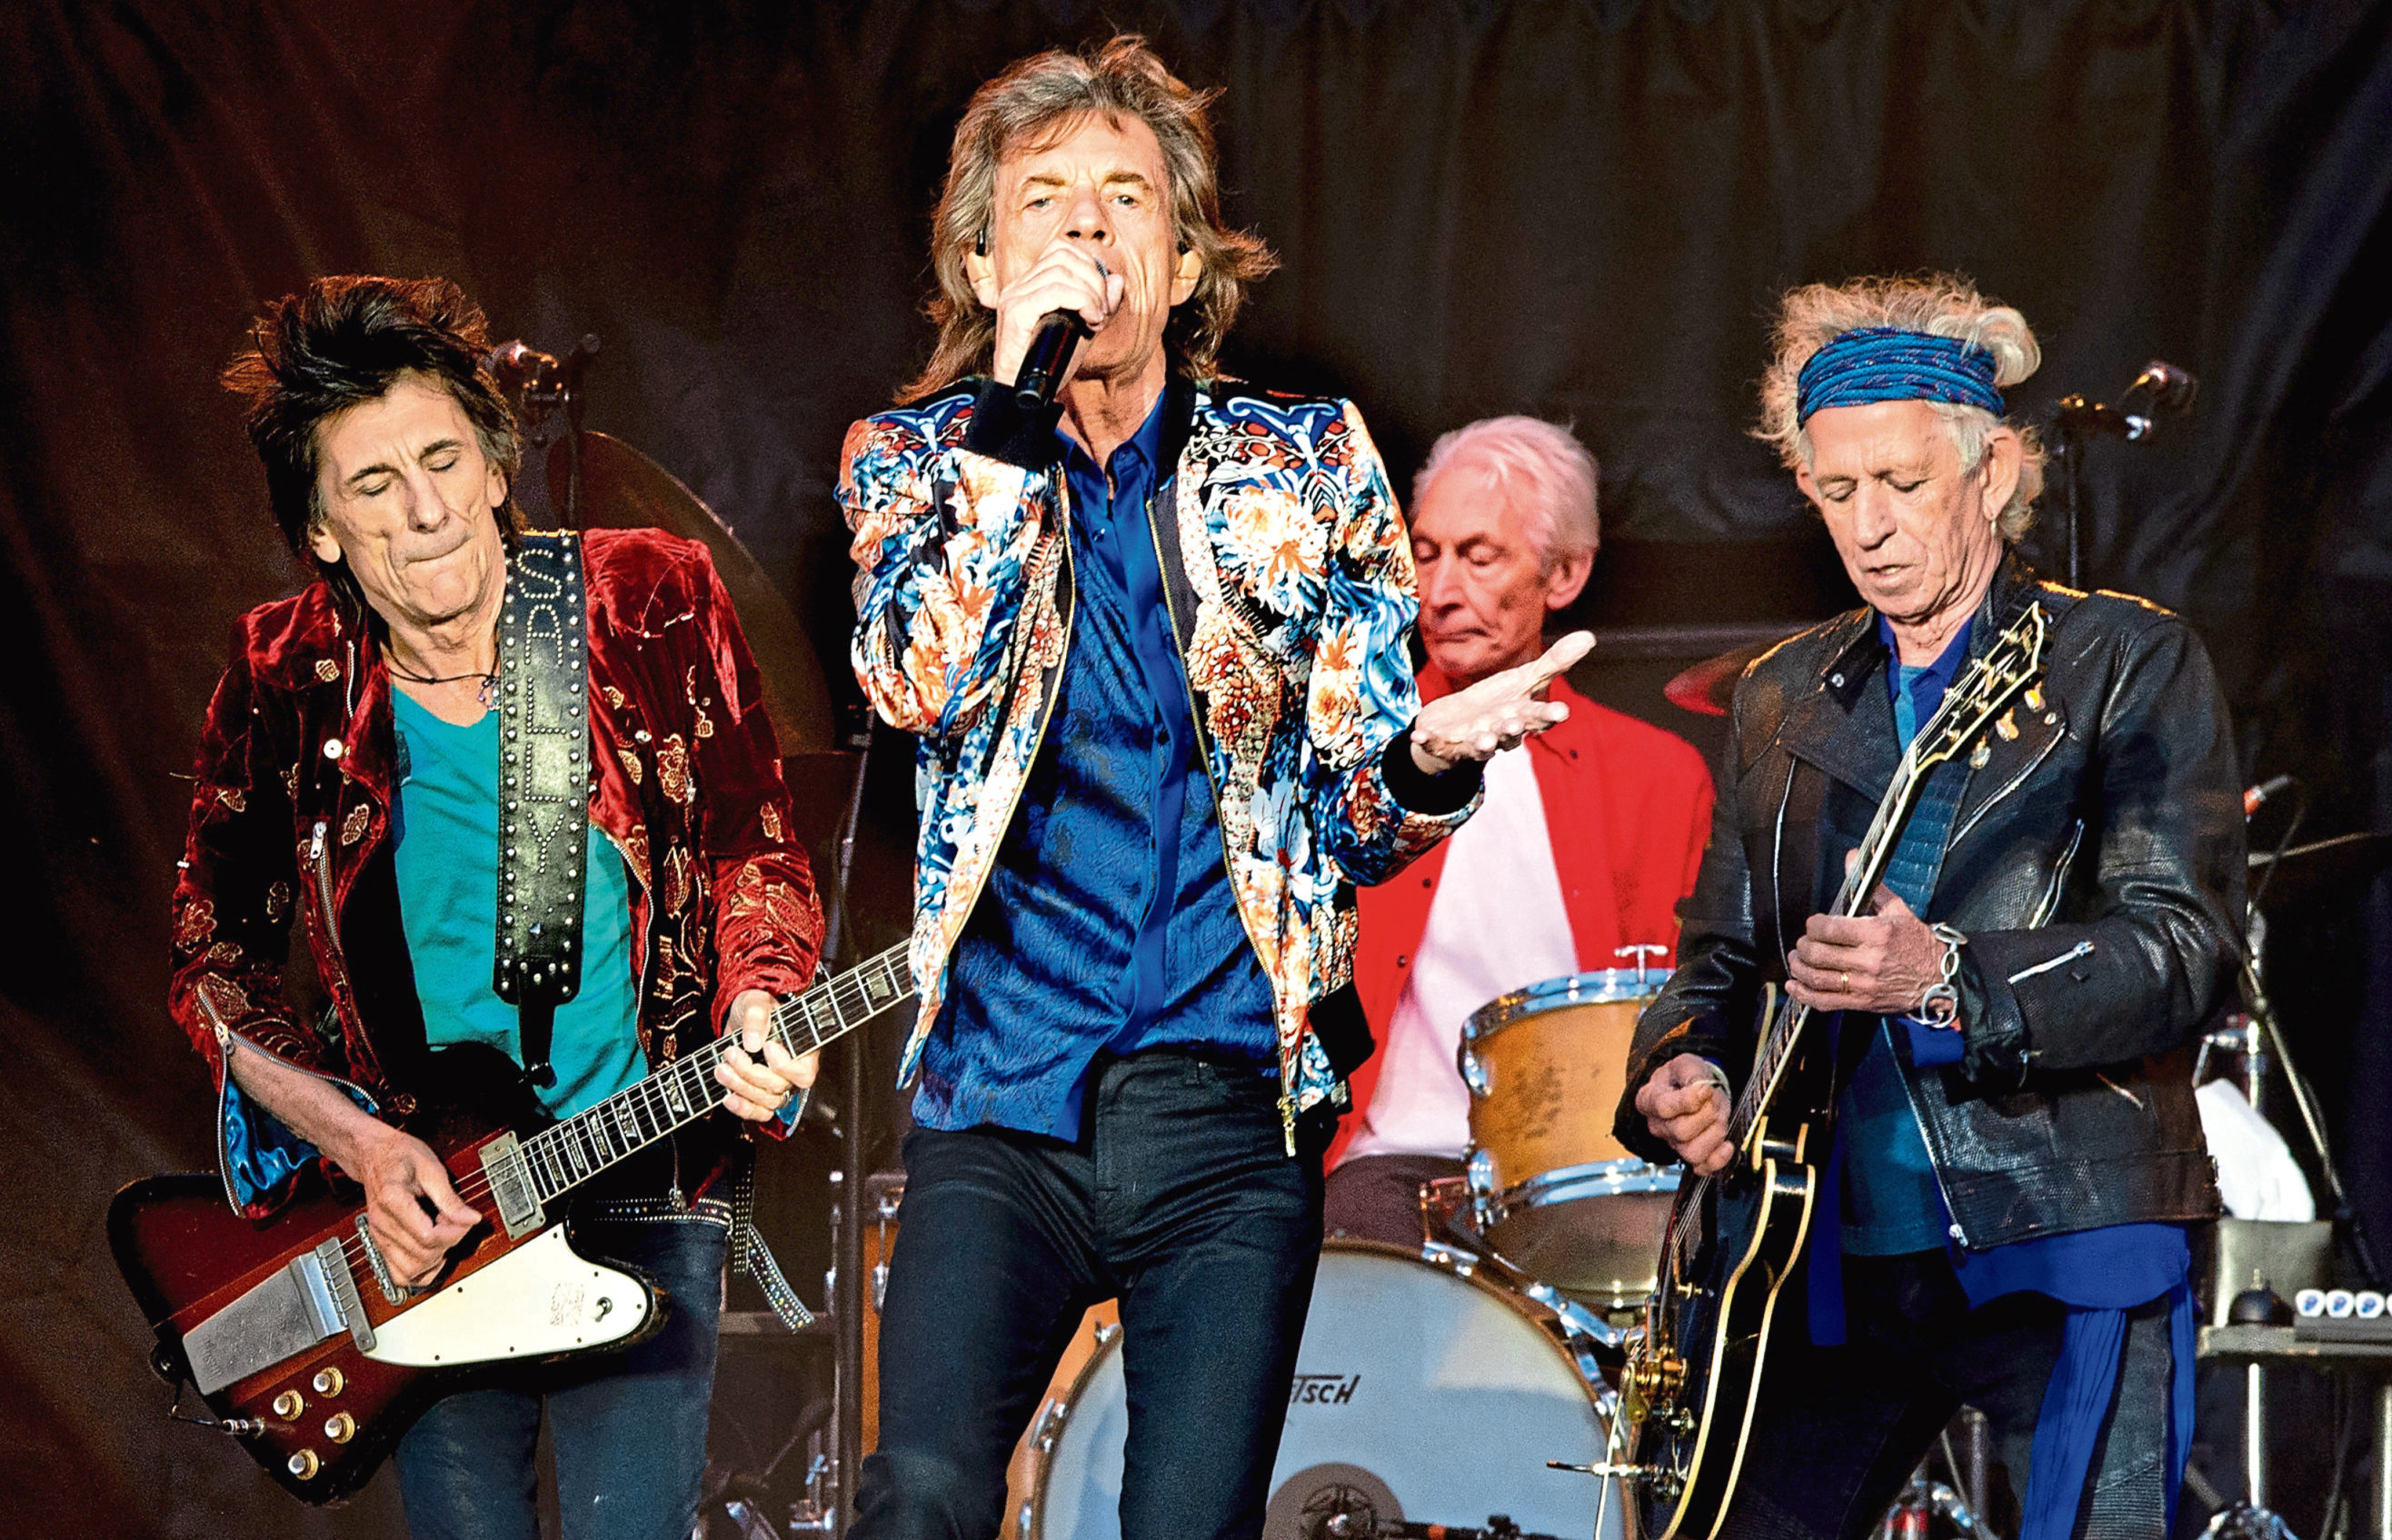 The Stones on stage last year